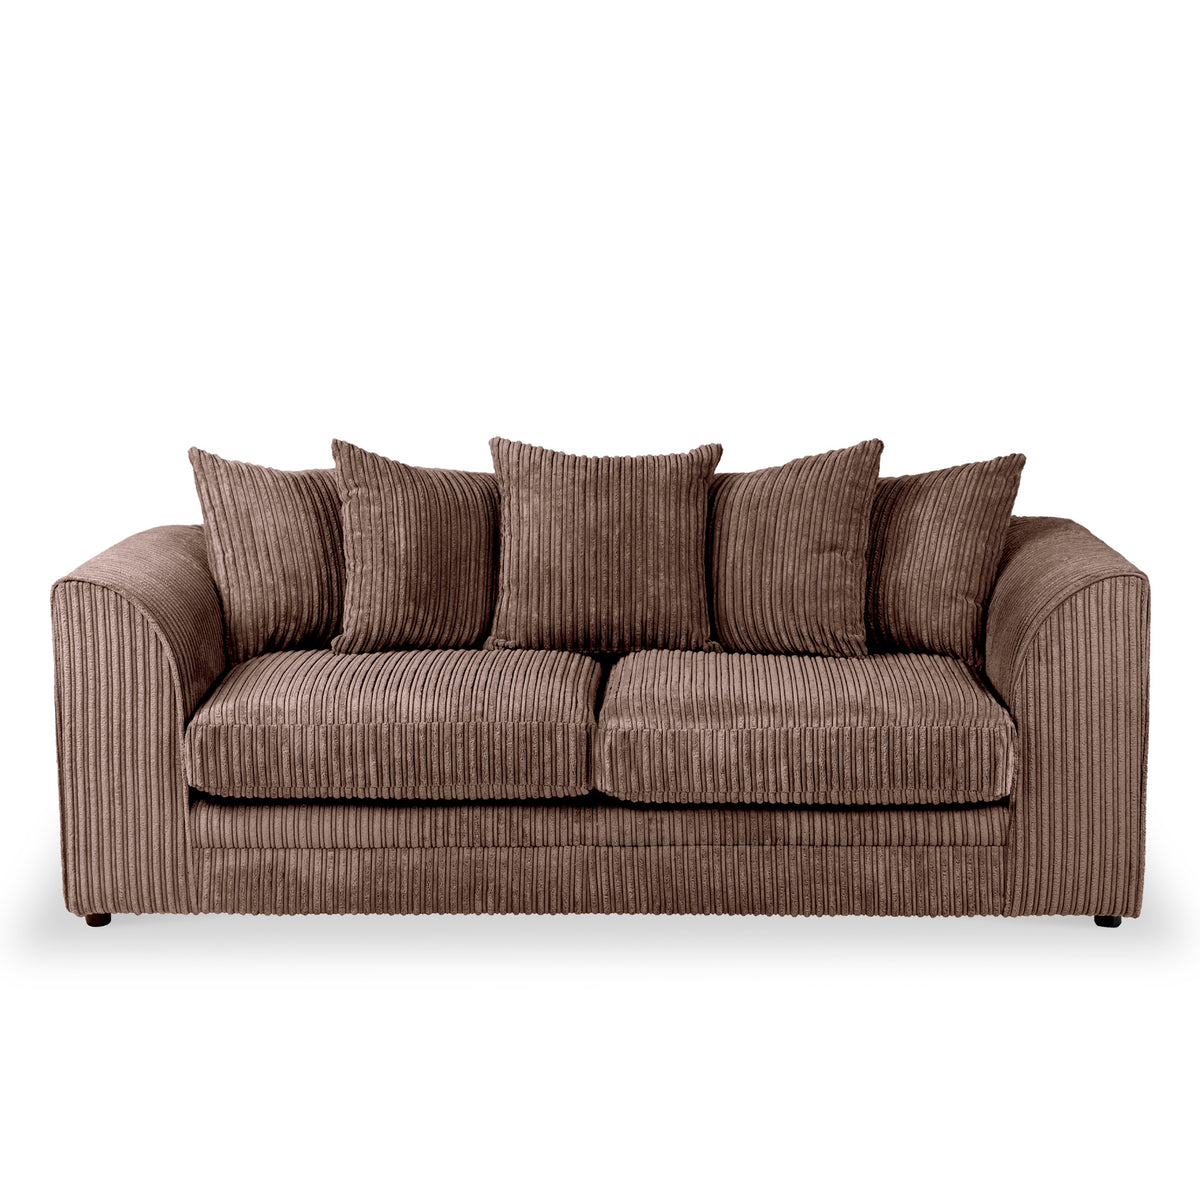 Bletchley Chocolate Jumbo Cord 3 Seater Sofa from Roseland Furniture